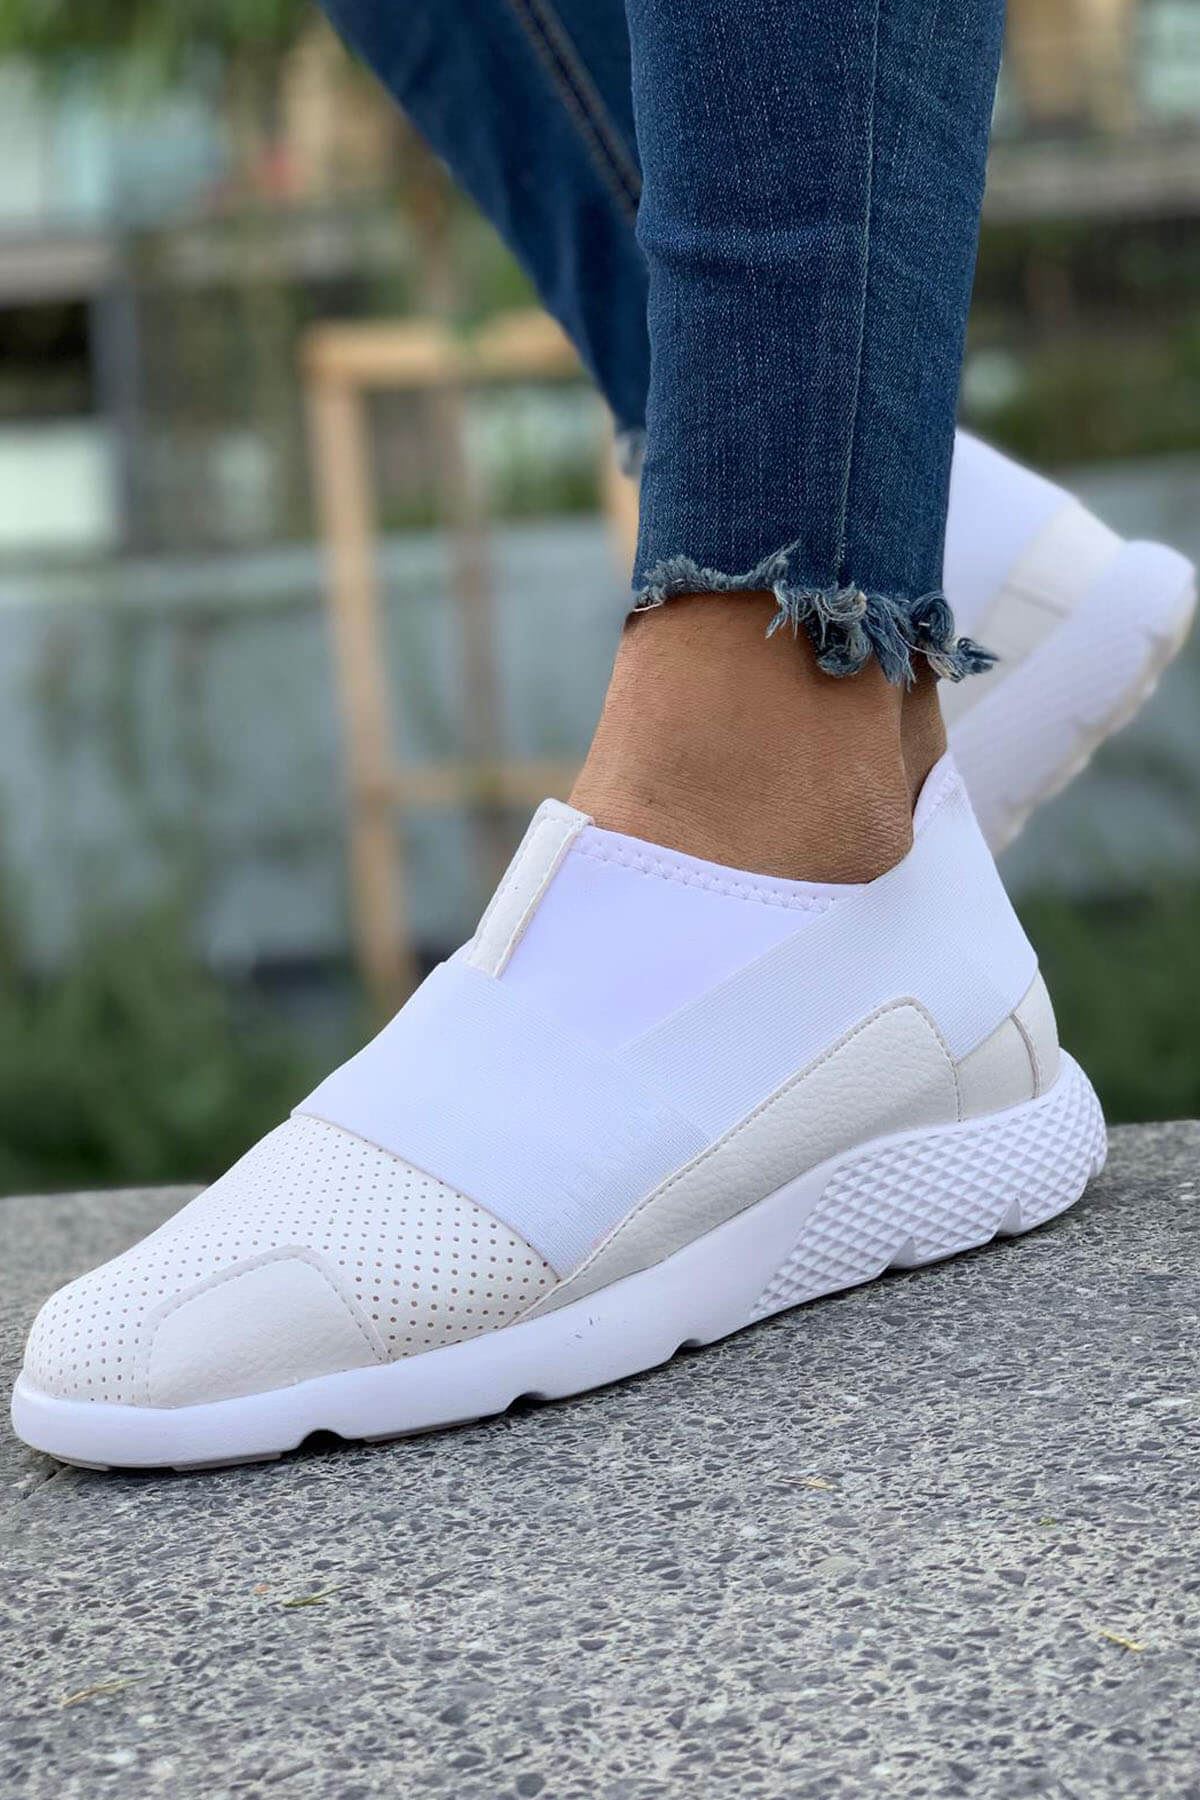 Chekich Men's Shoes Black Color Slip On Summer Season Breathable Casual Sport Air Lightweight Gym Odorless Sneakers Comfortable Fashion Training Workout Walking Camping Beach Water Daily Footwear CH035